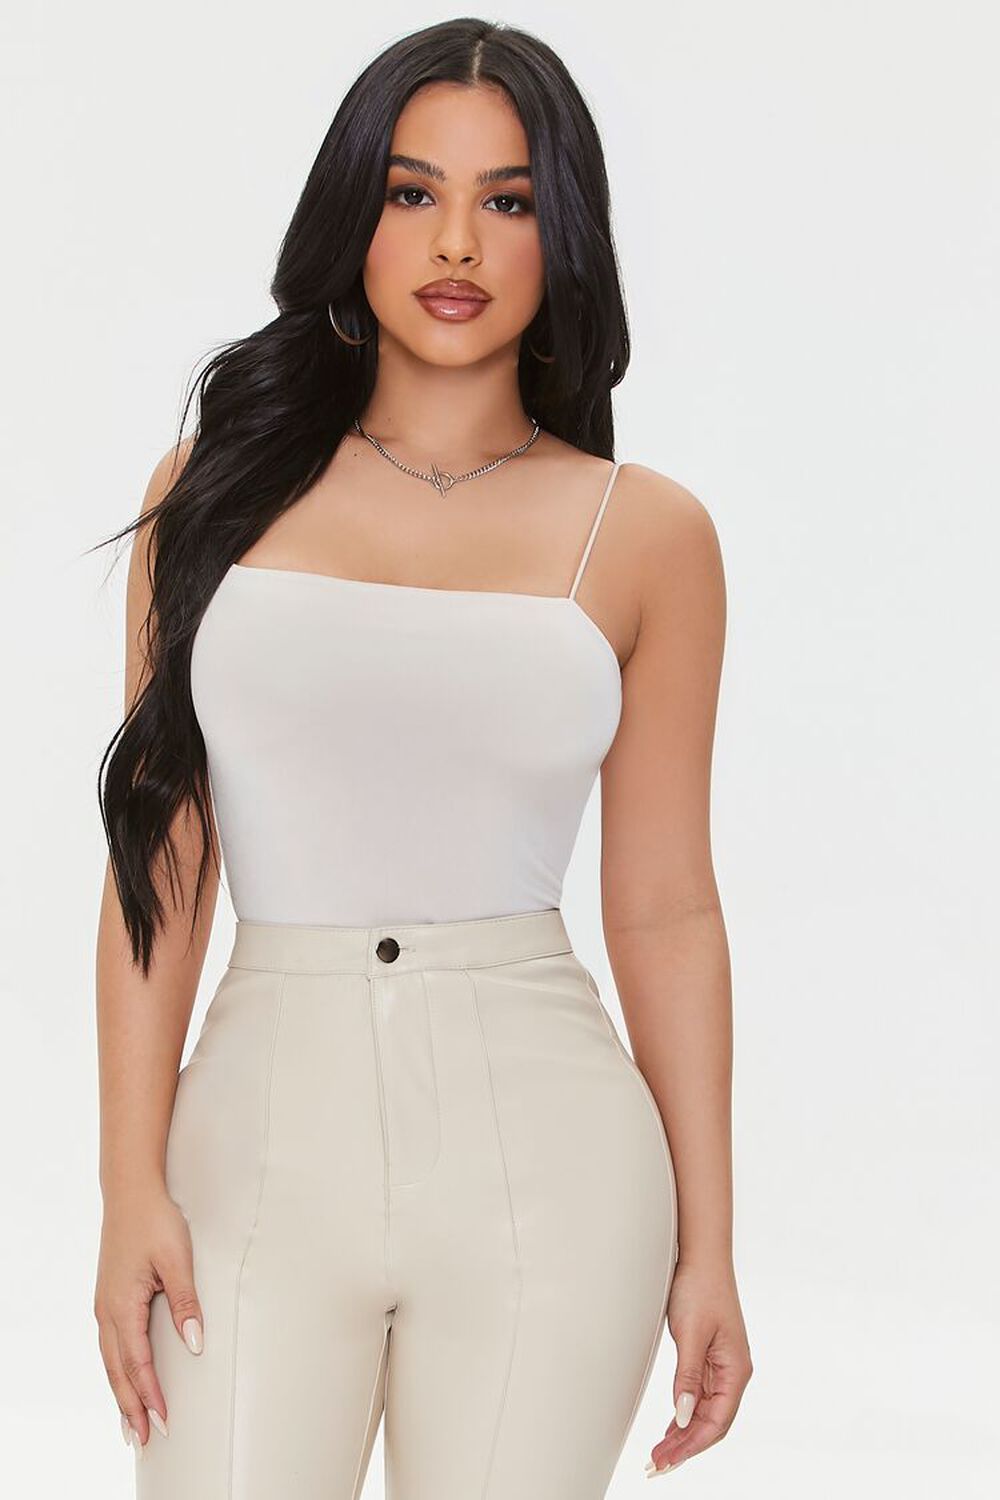 ASH BROWN Fitted Cami Bodysuit, image 1